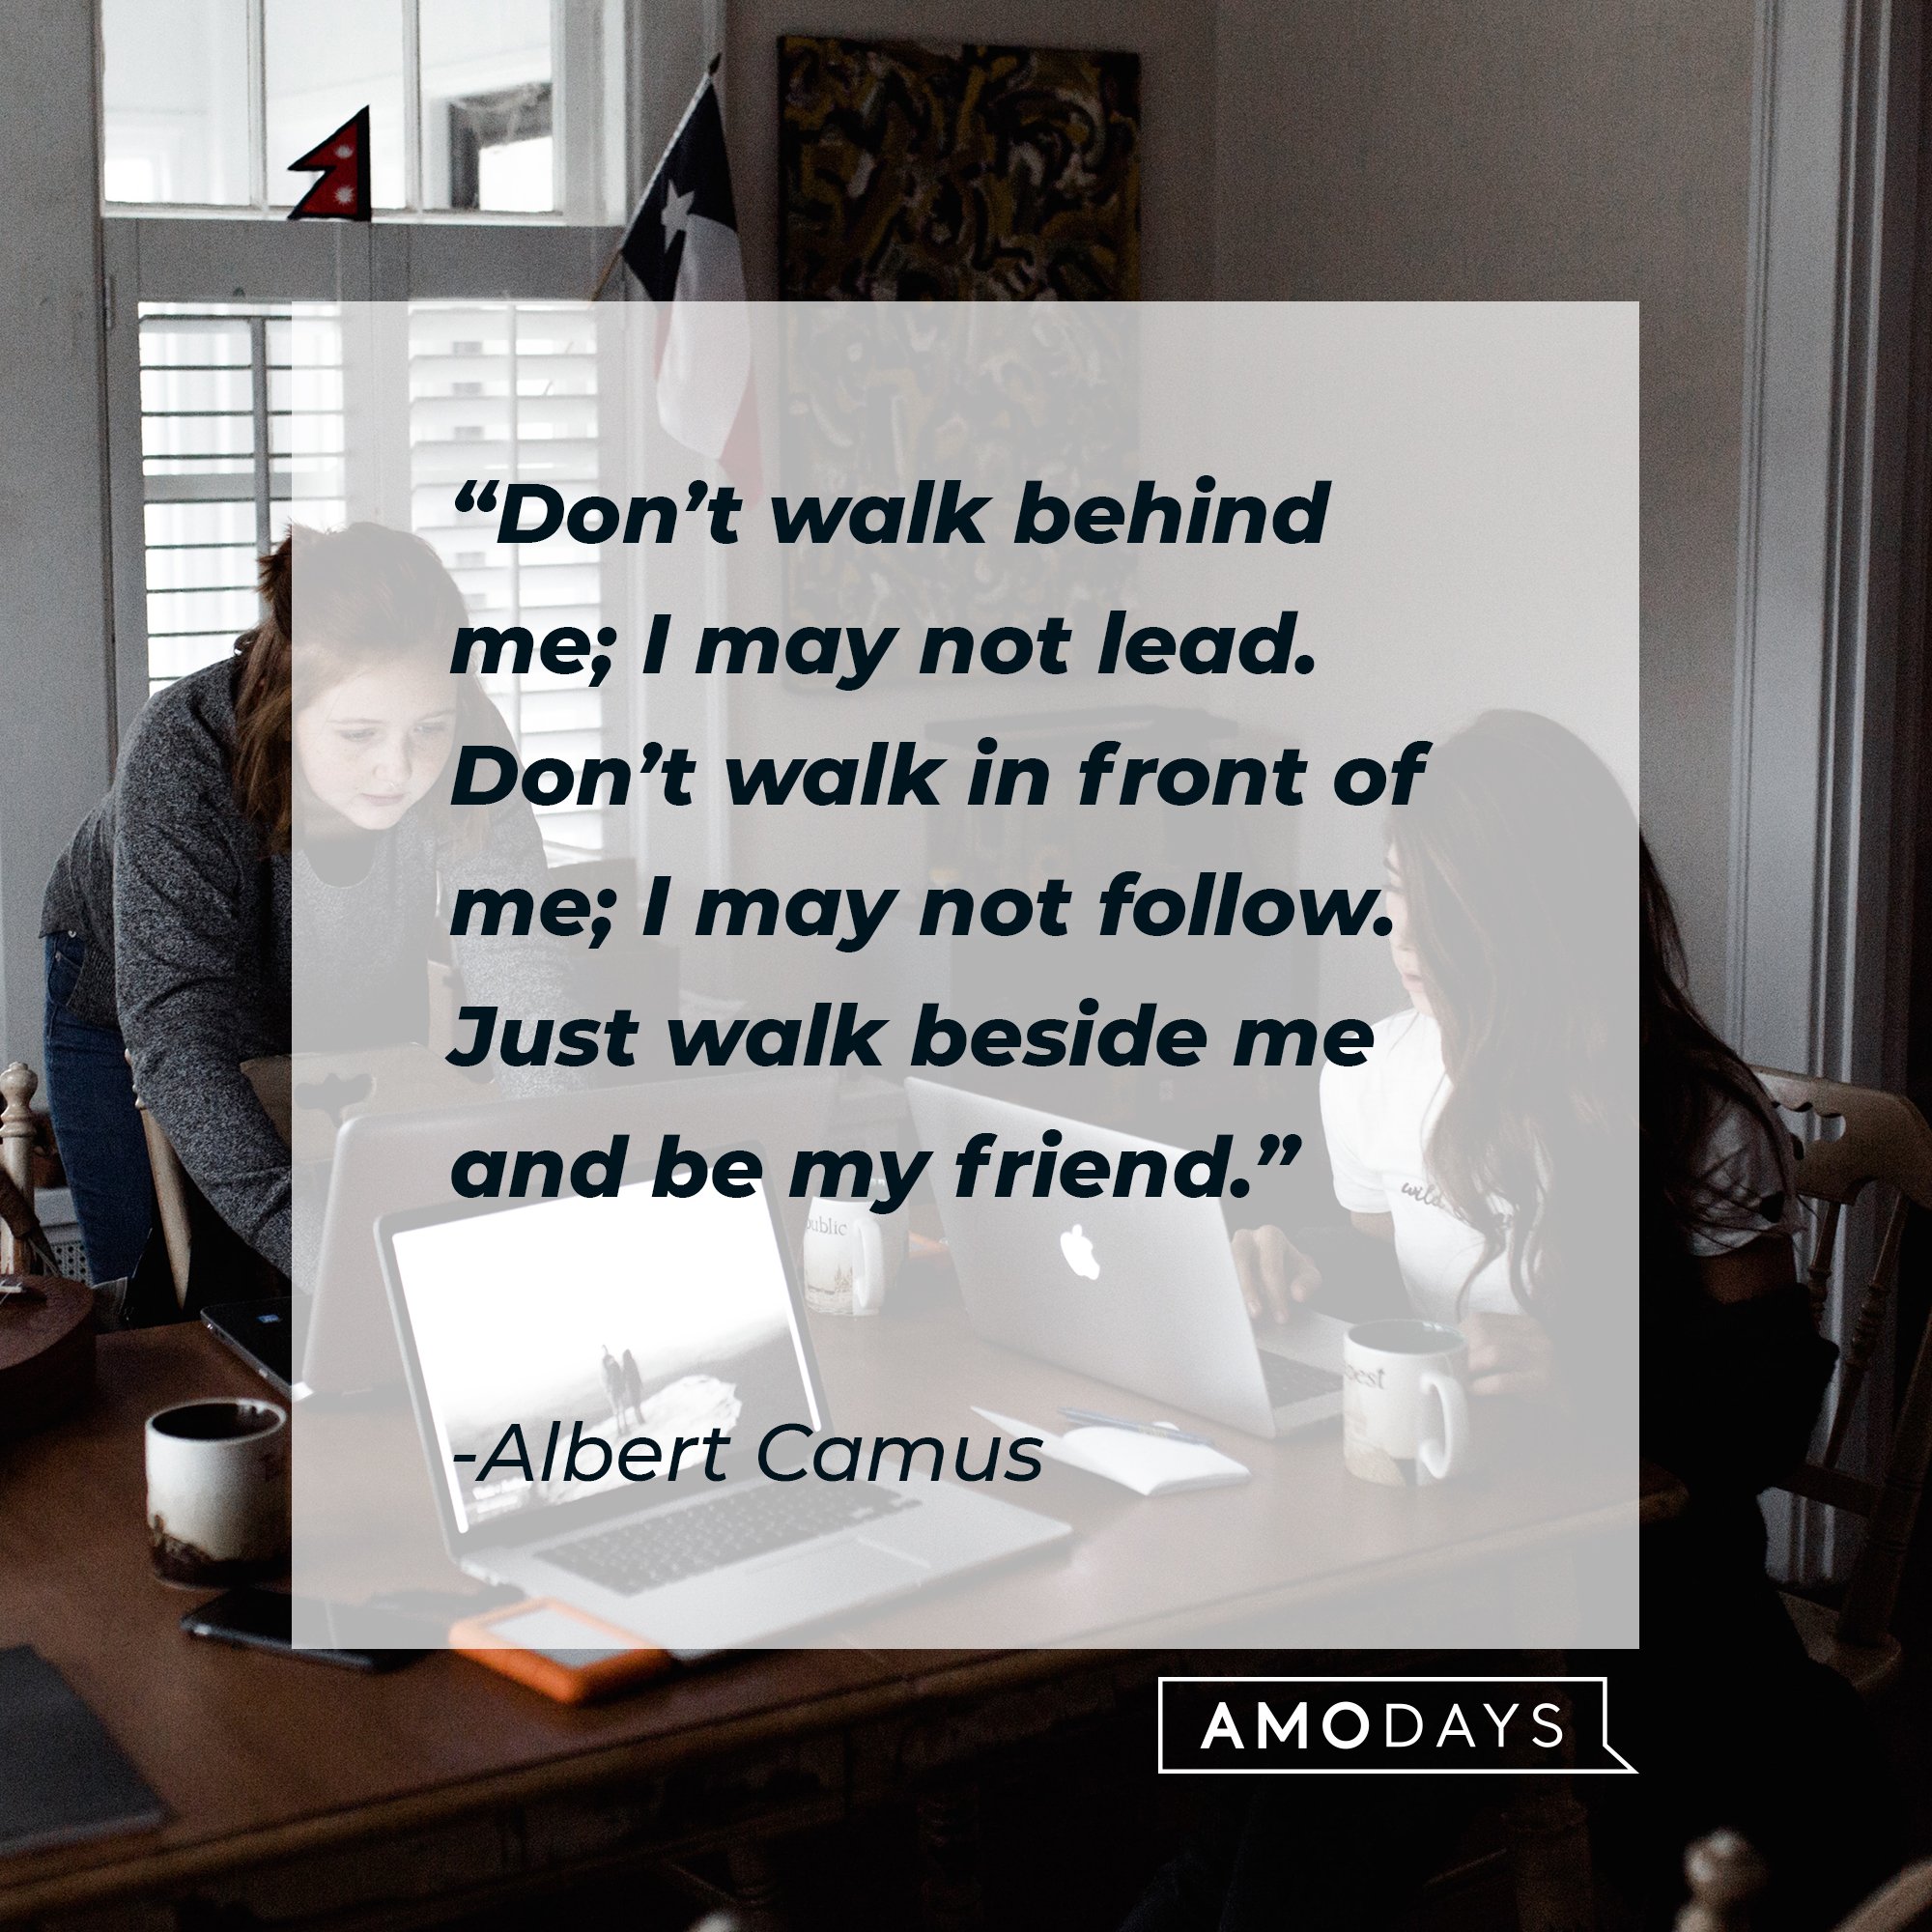 Albert Camus’ quote: “Don’t walk behind me; I may not lead. Don’t walk in front of me; I may not follow. Just walk beside me and be my friend.” | Image: AmoDays 